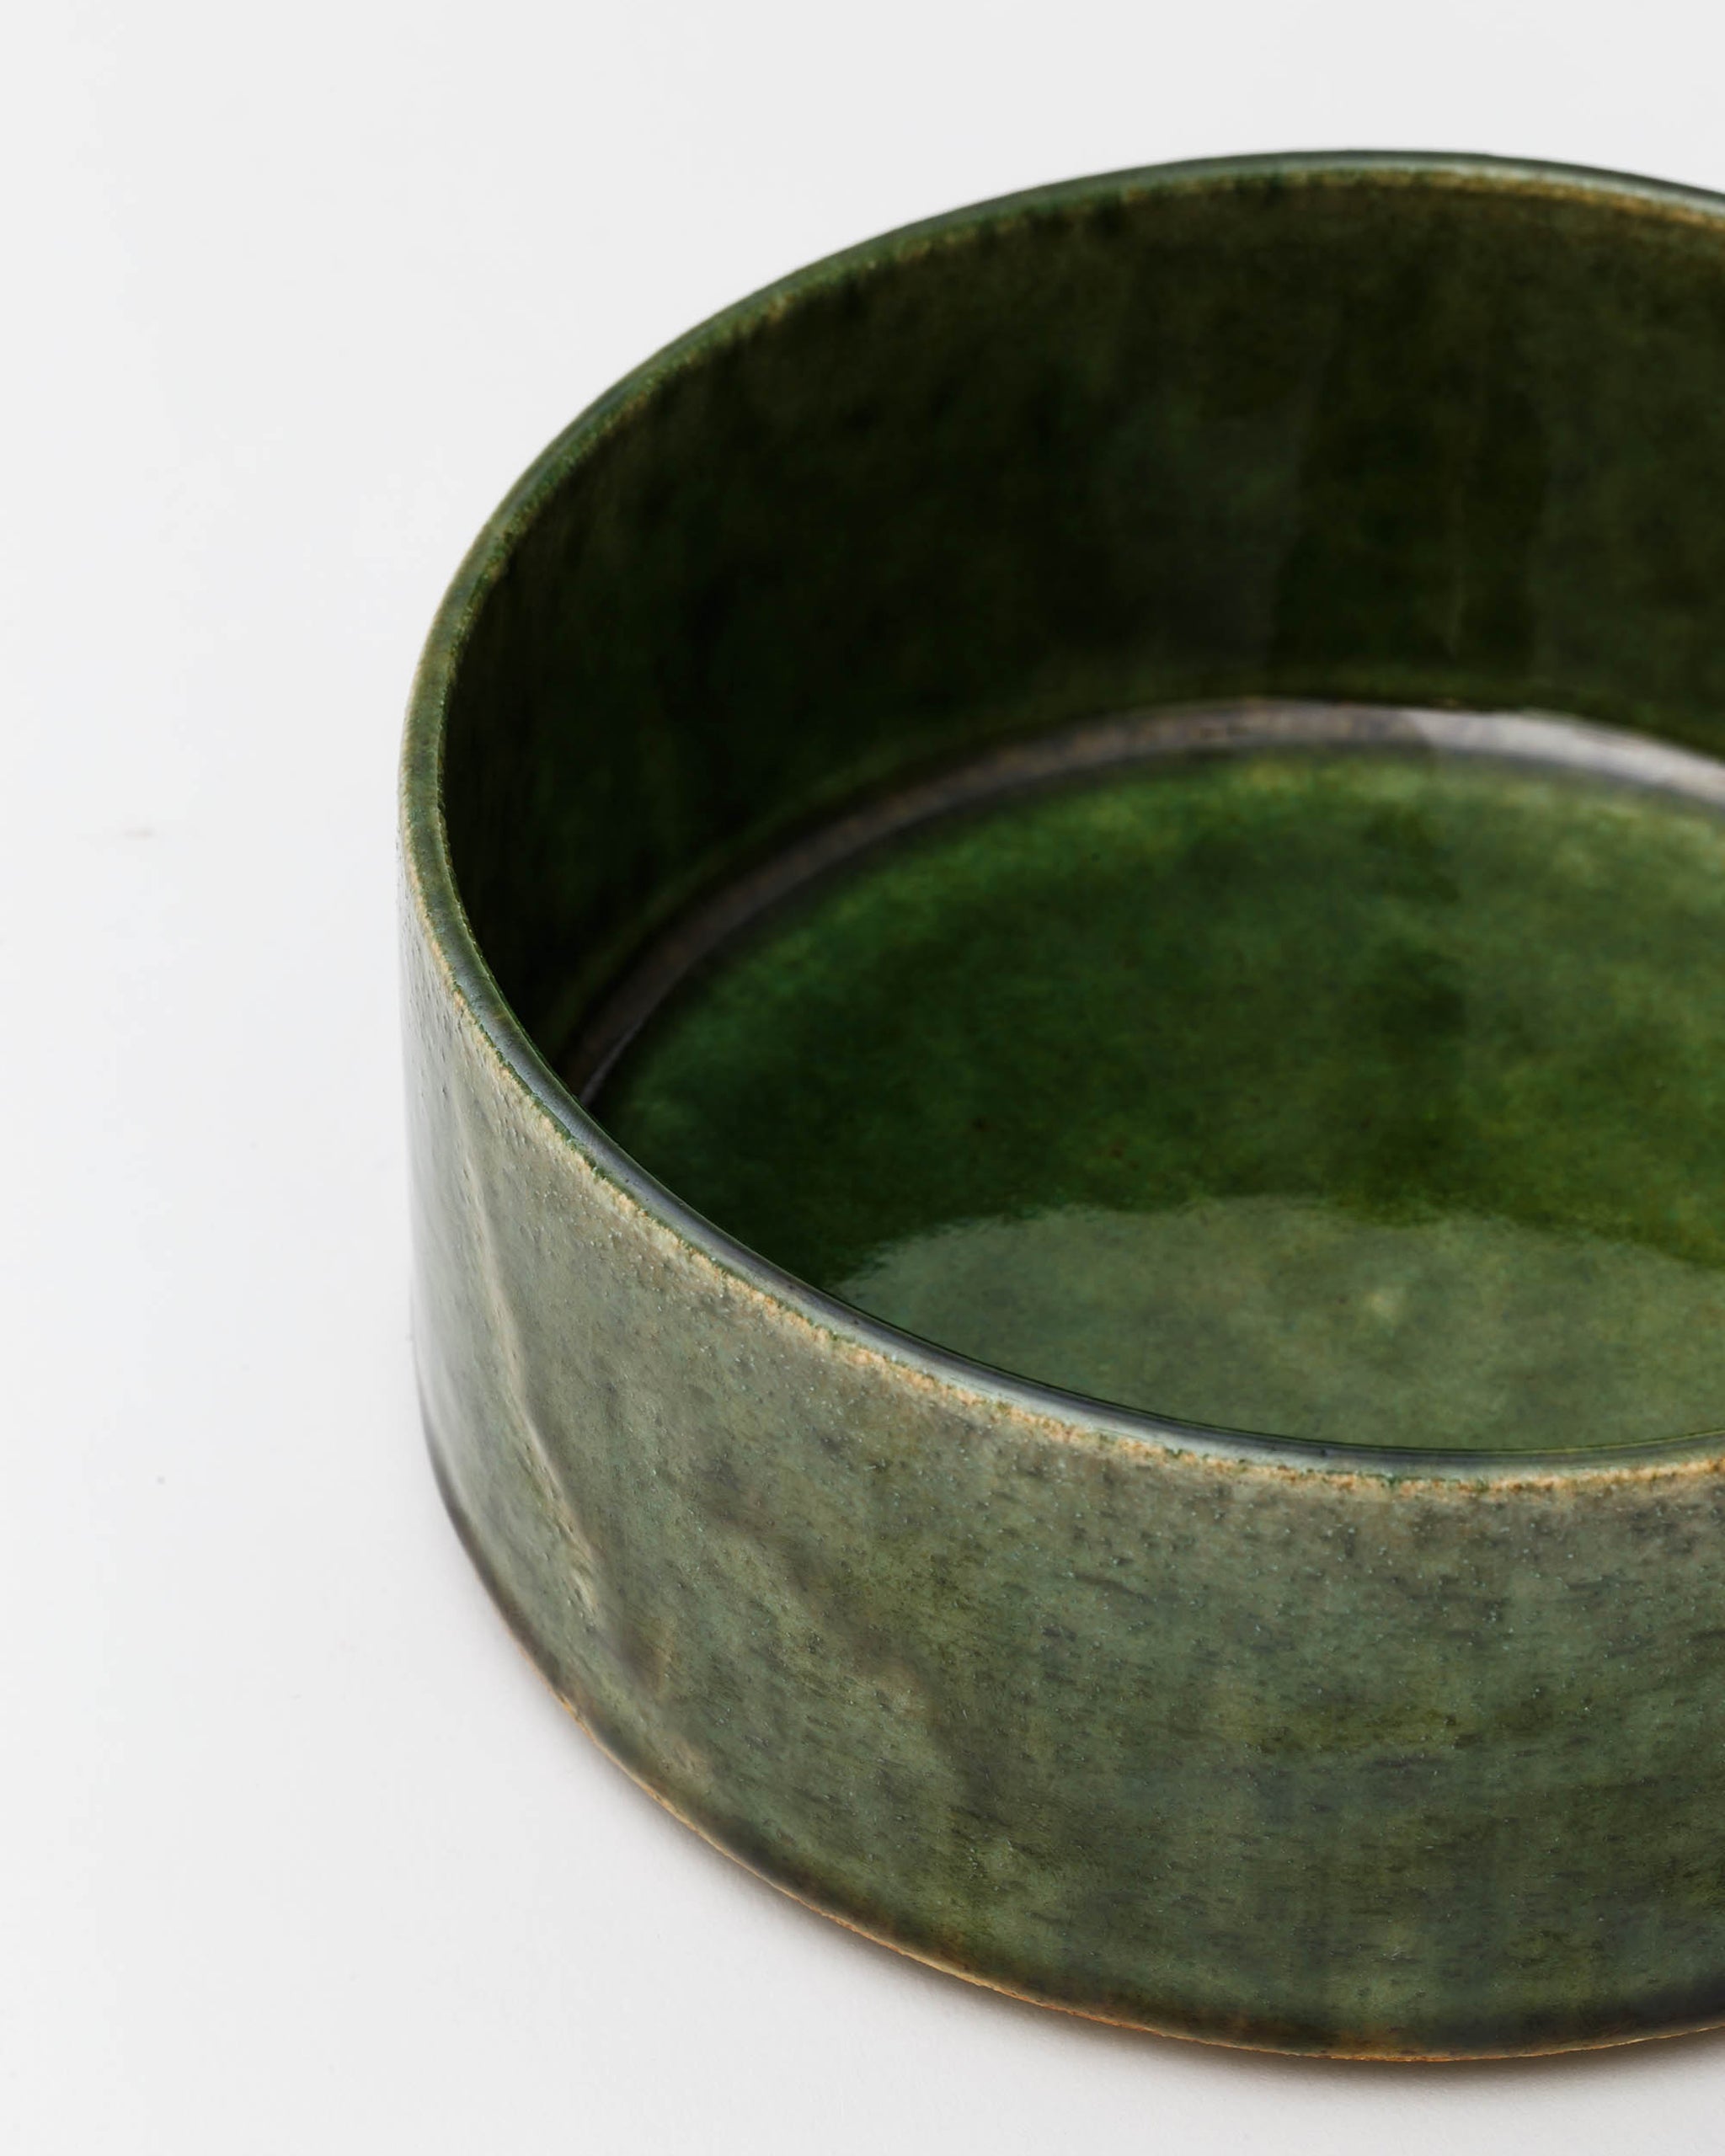 Cropped image looking into large ceramic oribe bowl with deep green glaze by Time and Style against white-gray background.